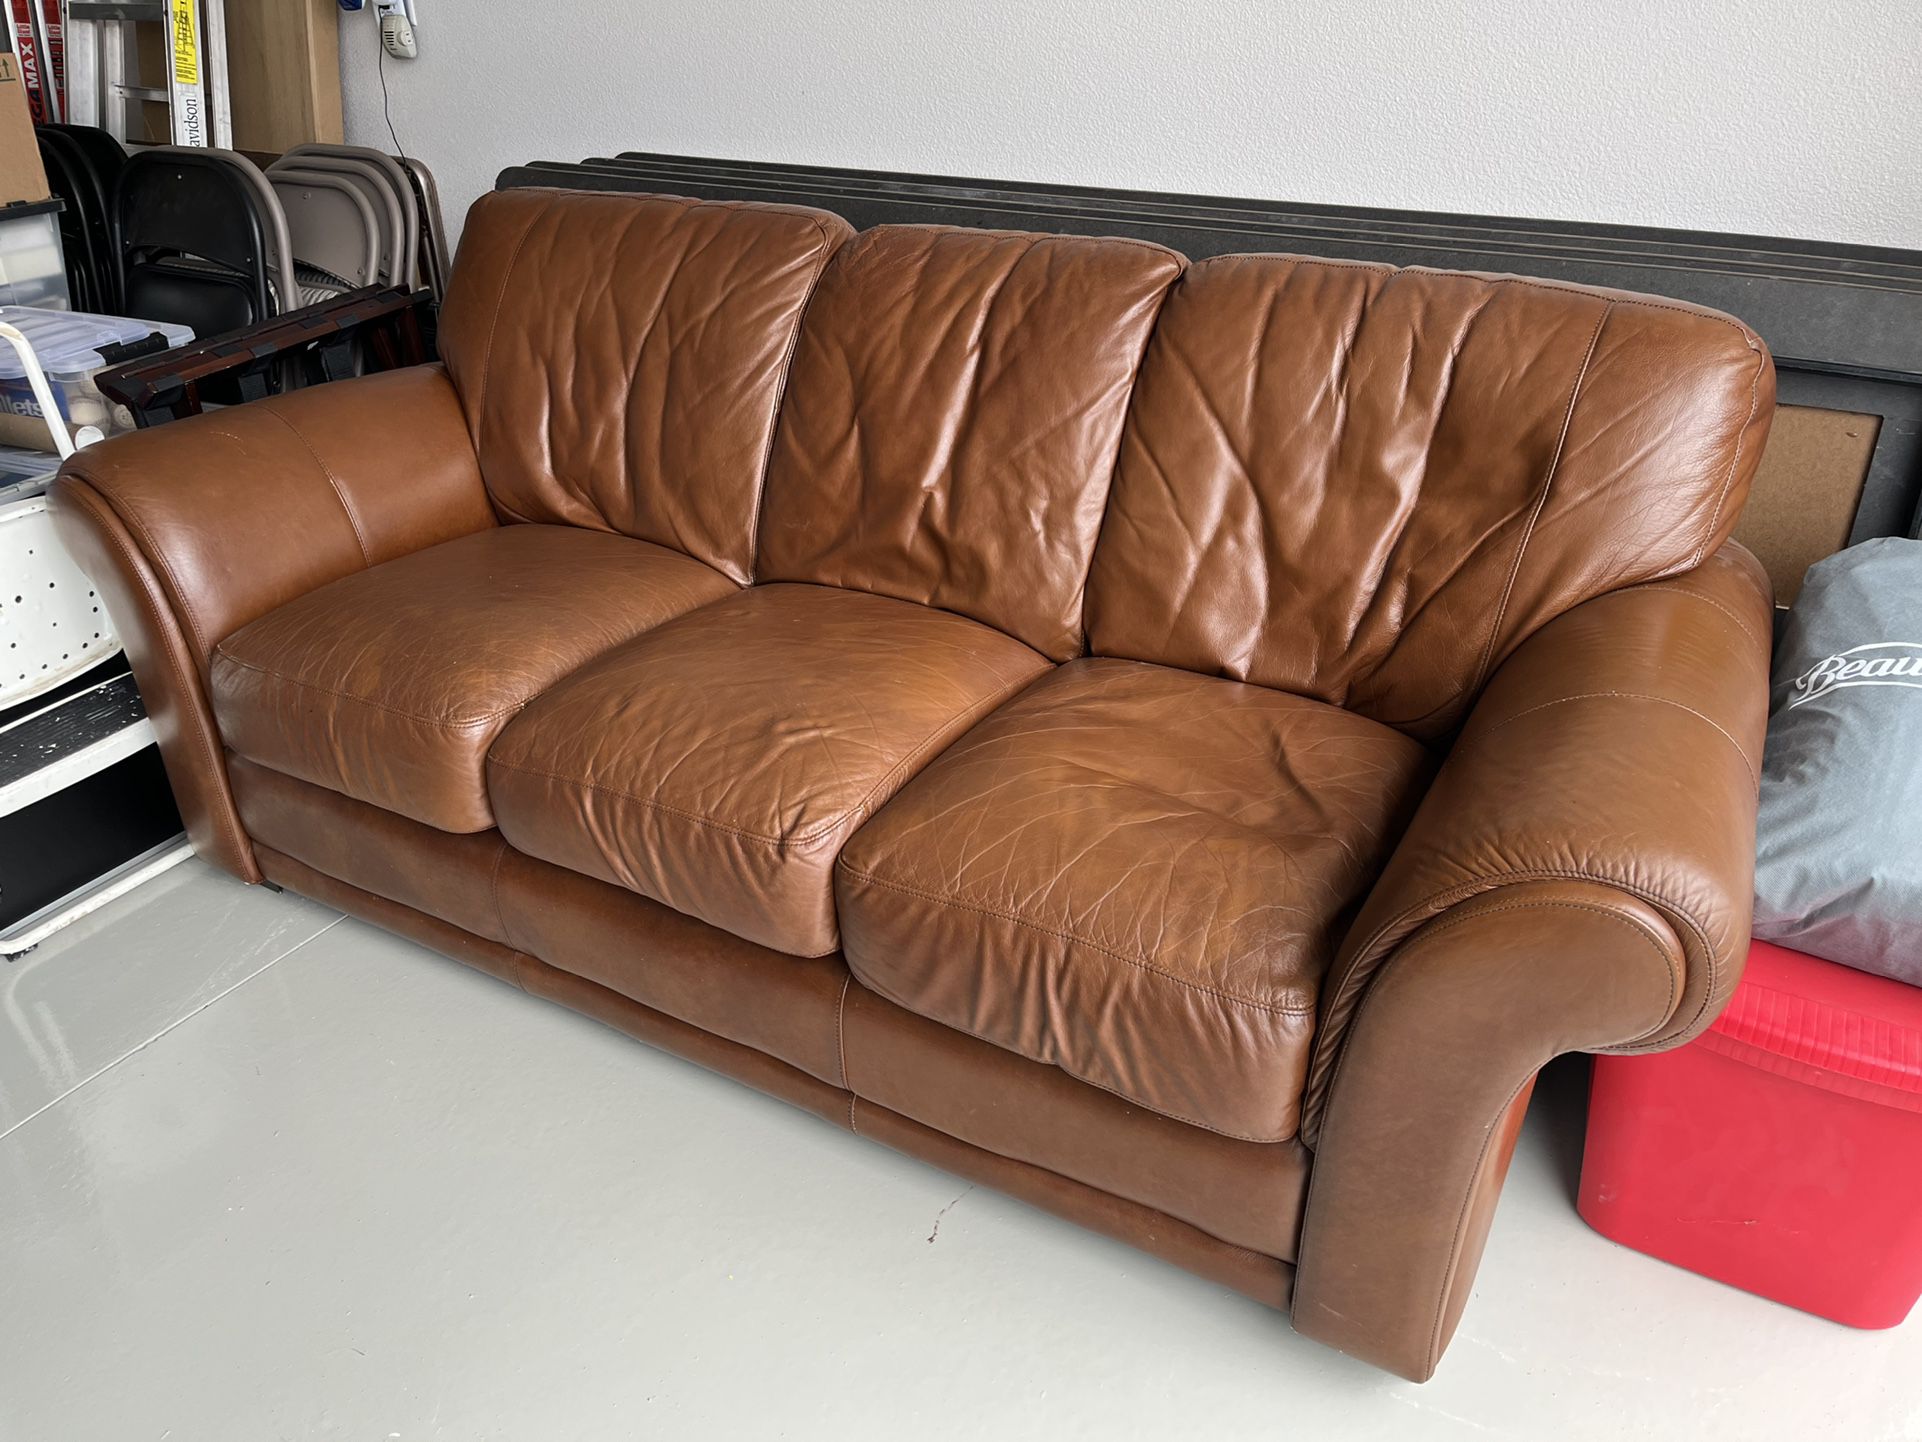 Leather sofa no longer needed in very good condition